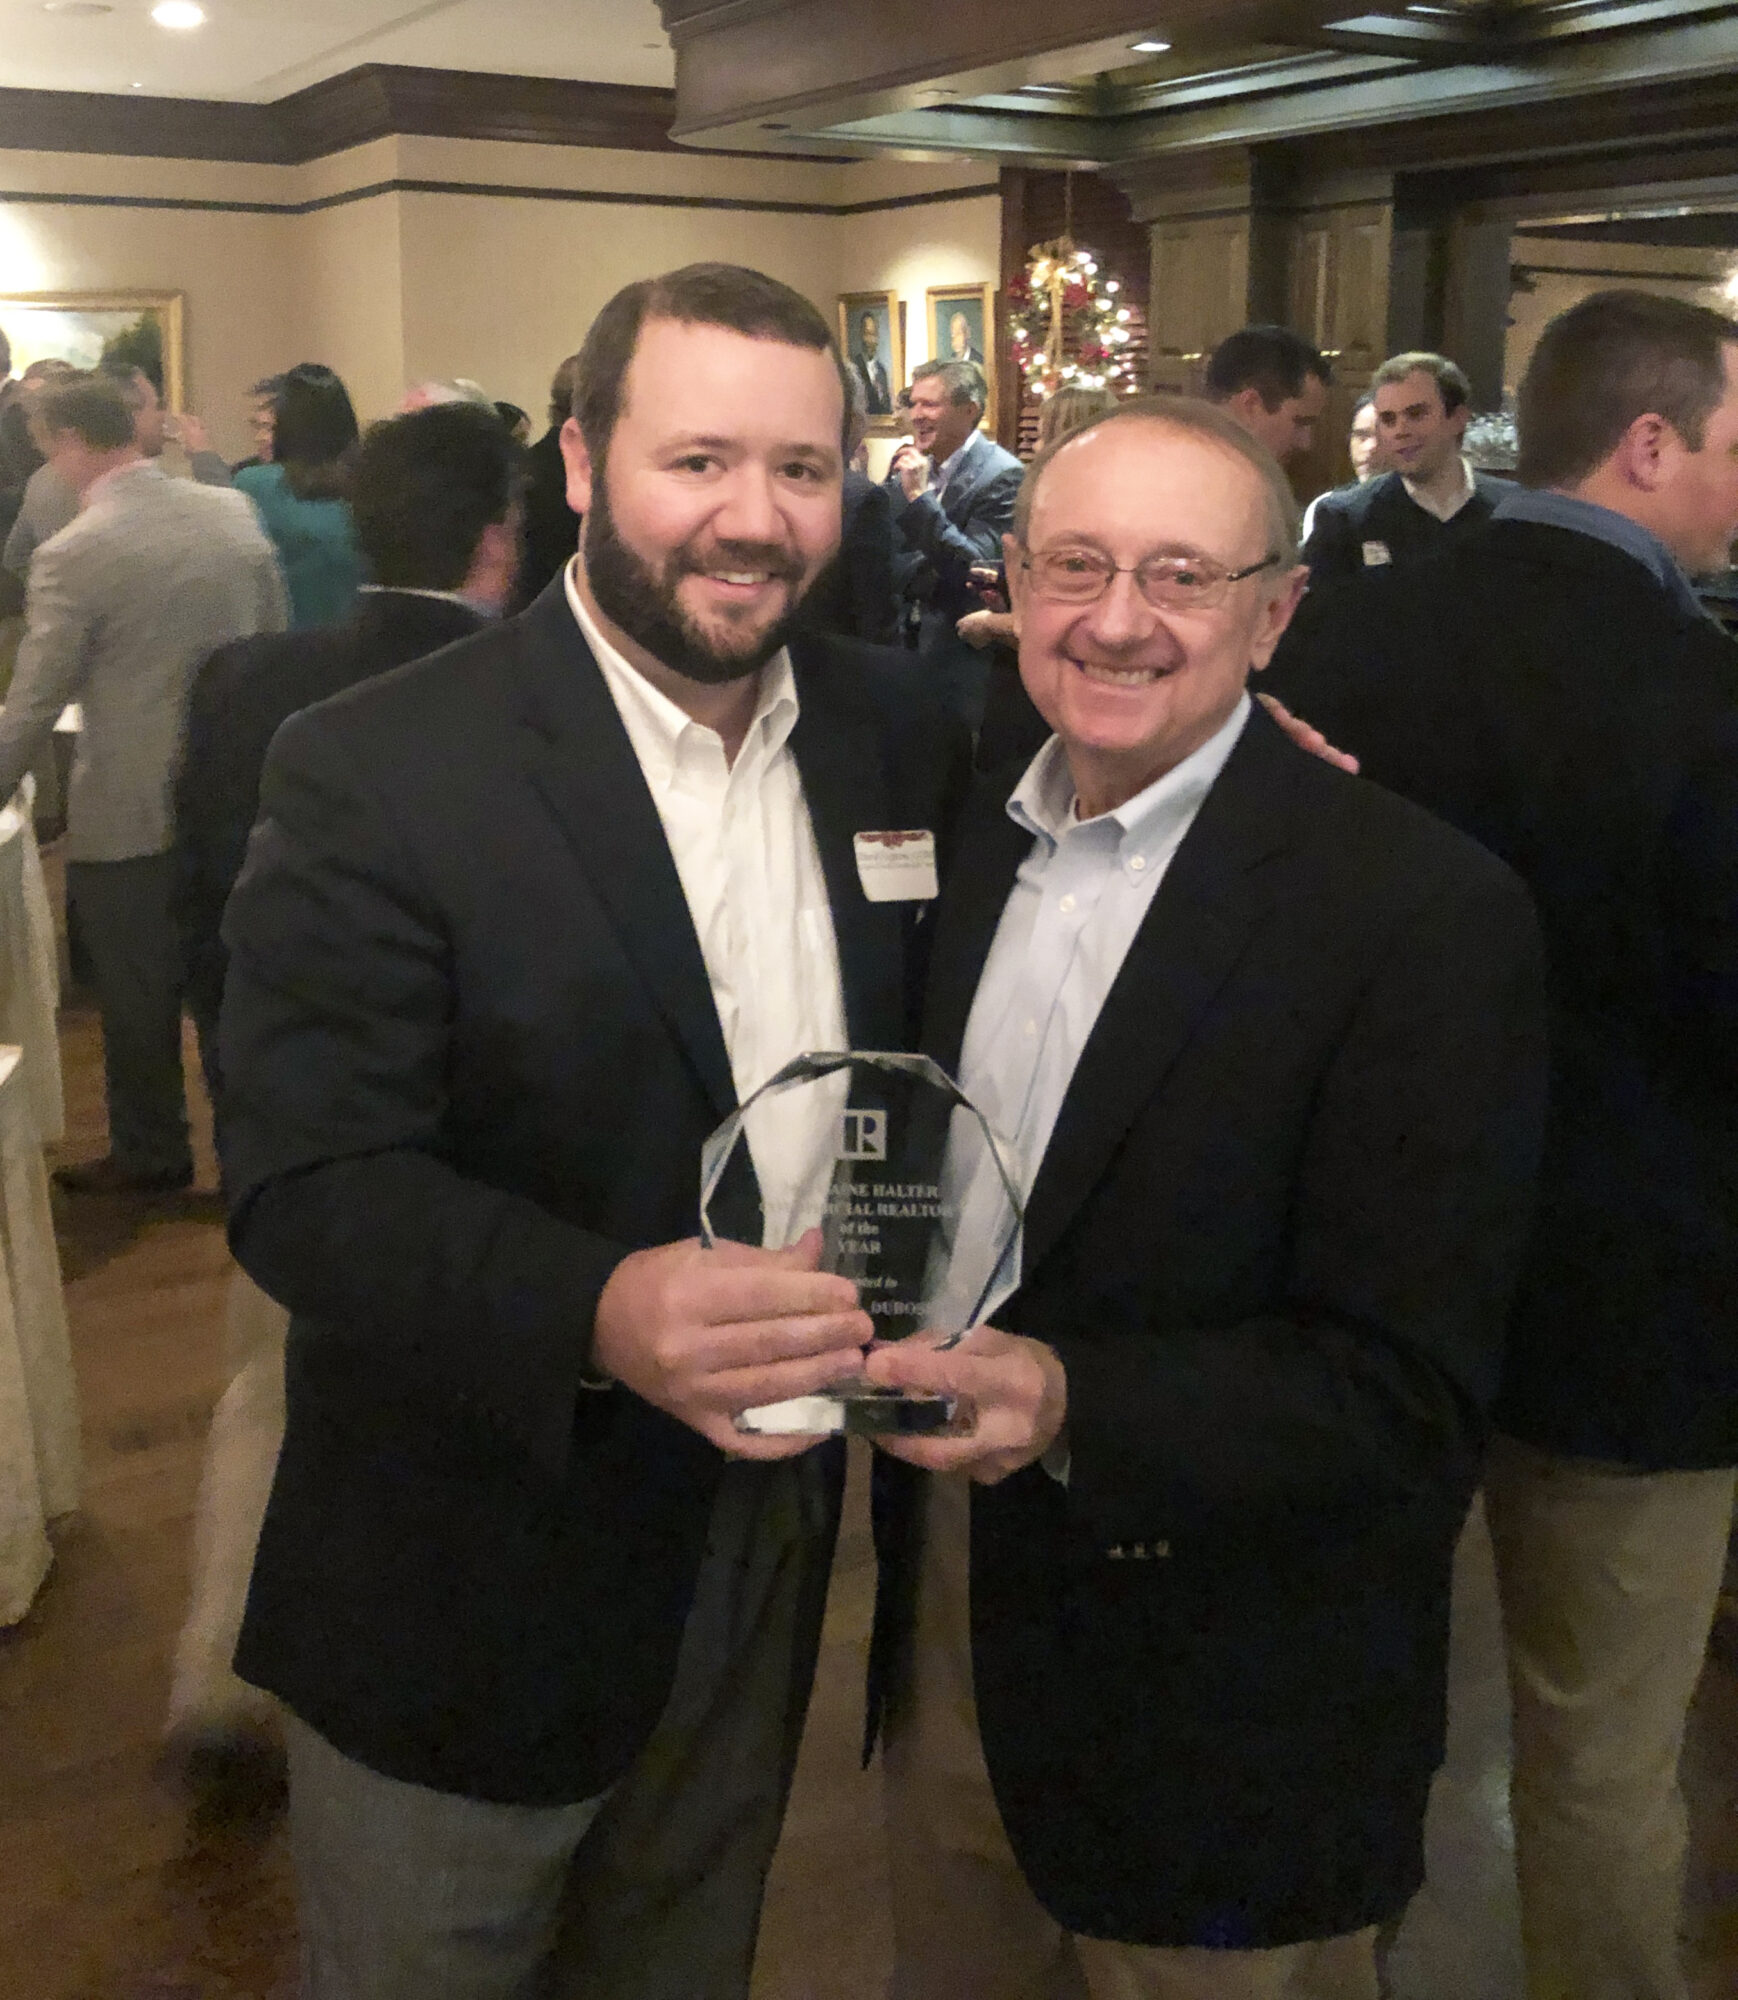 Sammy Dubose, 31 Year Caine Employee and 2018 Caine Halter Commercial Realtor® of the Year